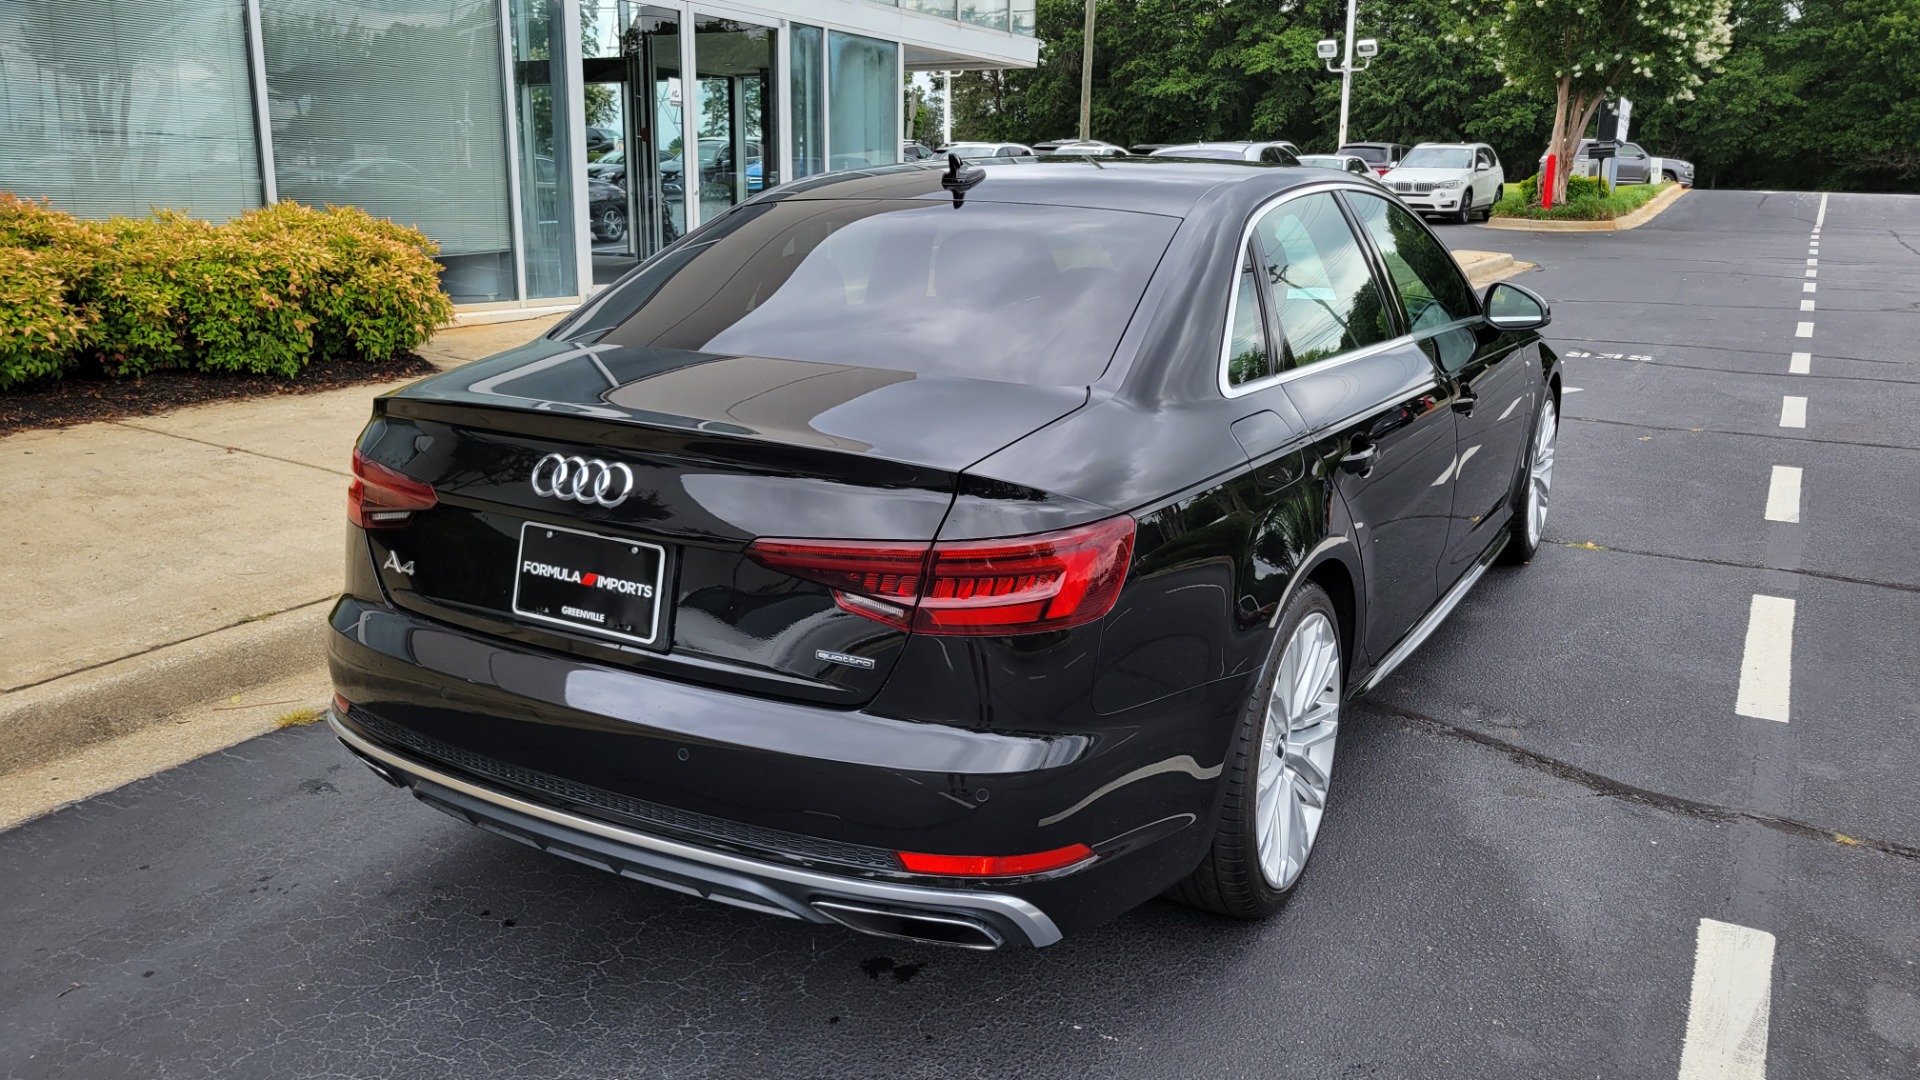 Used 2019 Audi A4 PREMIUM PLUS QUATTRO / SPORT / NAV / SUNROOF / REARVIEW for sale $37,495 at Formula Imports in Charlotte NC 28227 5